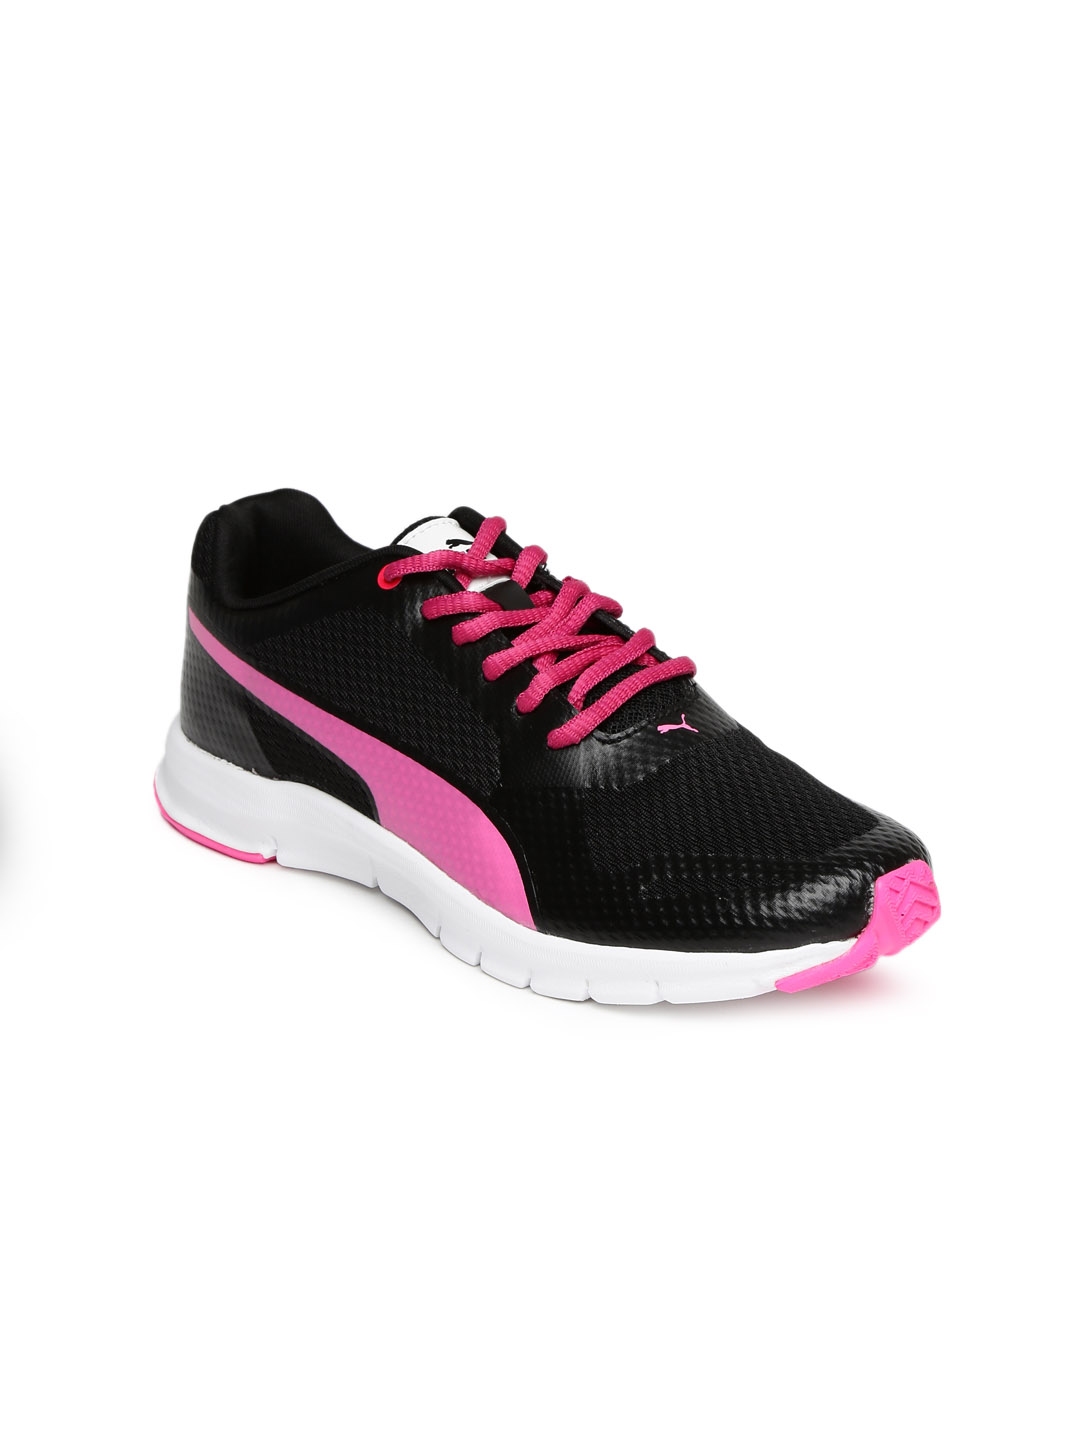 Buy Puma Women Black & Pink Blur IDP Running Shoes - Sports Shoes for ...